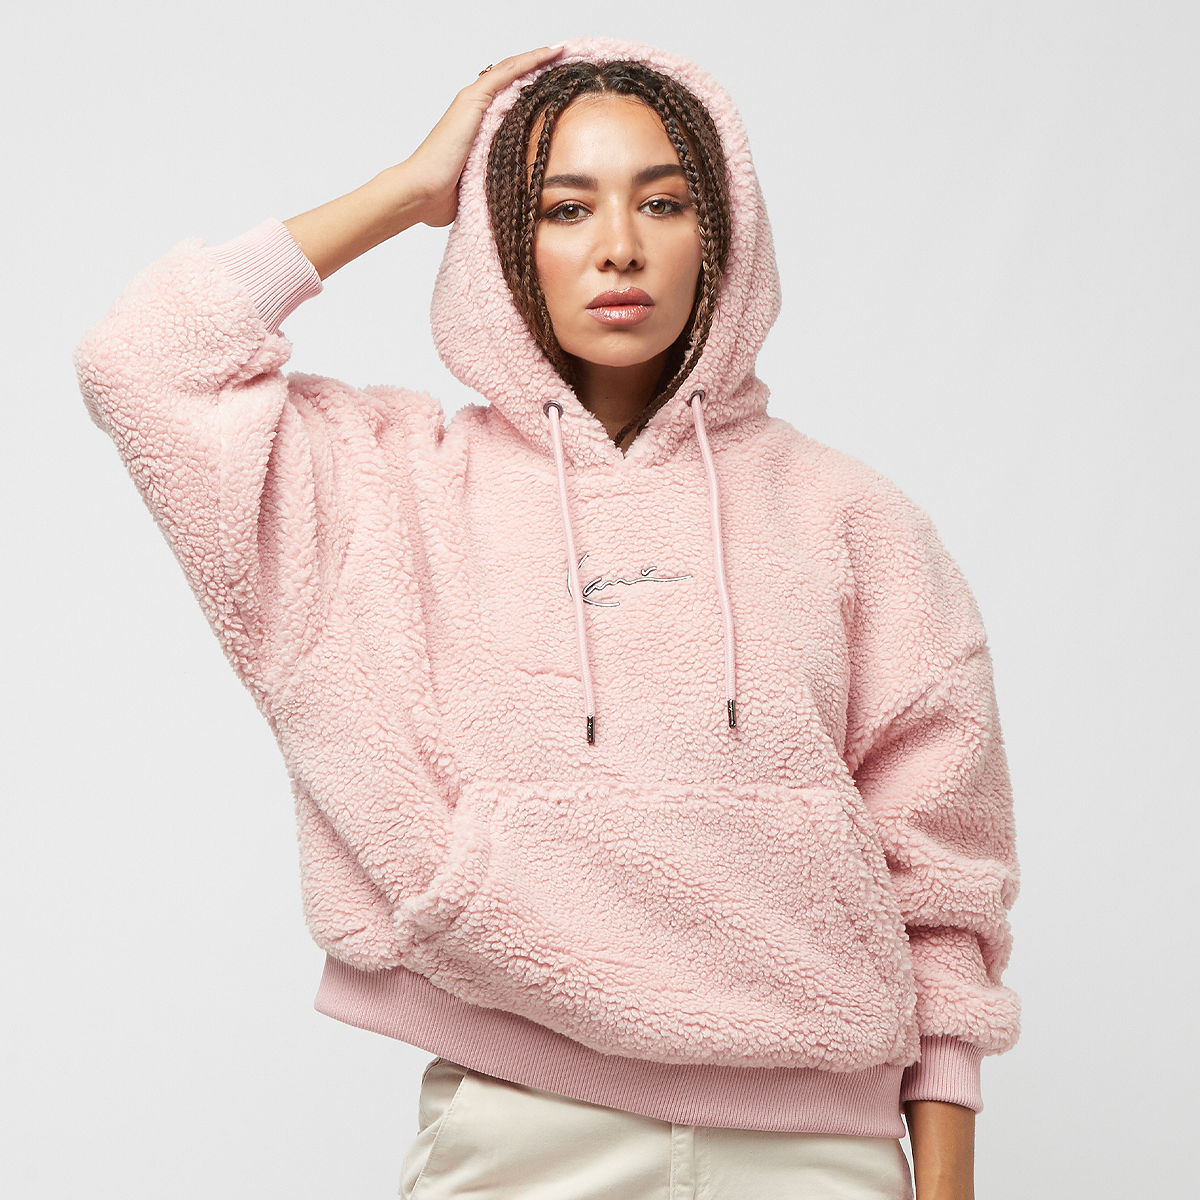 karl kani metal signature teddy os hoodie, sweats à capuche, vêtements, dusty rose, taille: s, tailles disponibles: